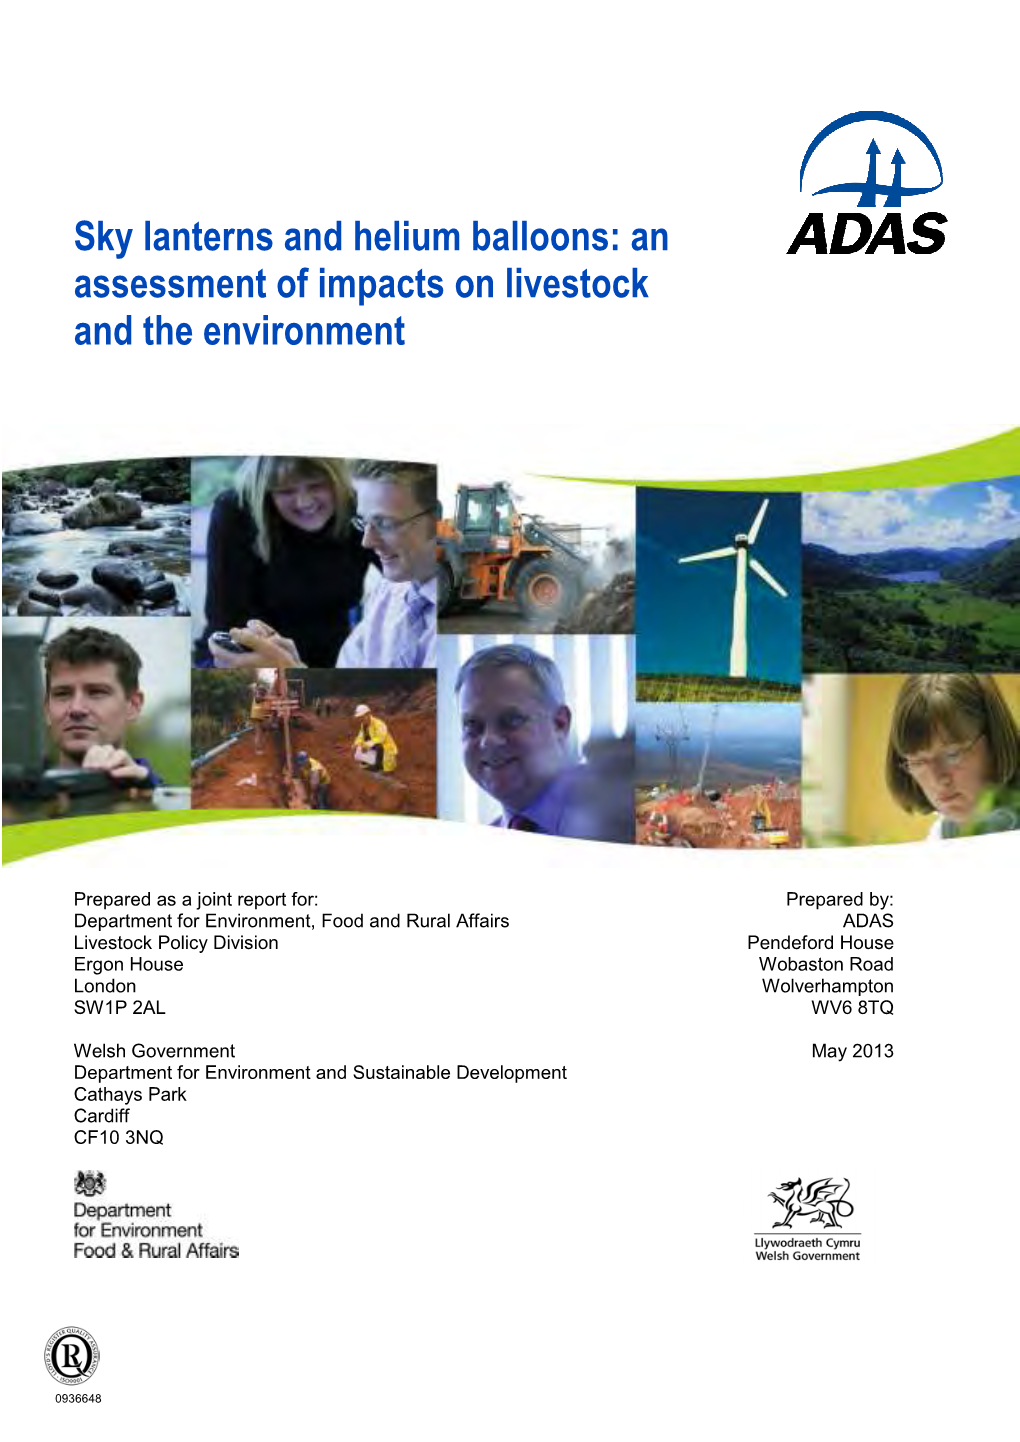 Sky Lanterns and Helium Balloons: an Assessment of Impacts on Livestock and the Environment